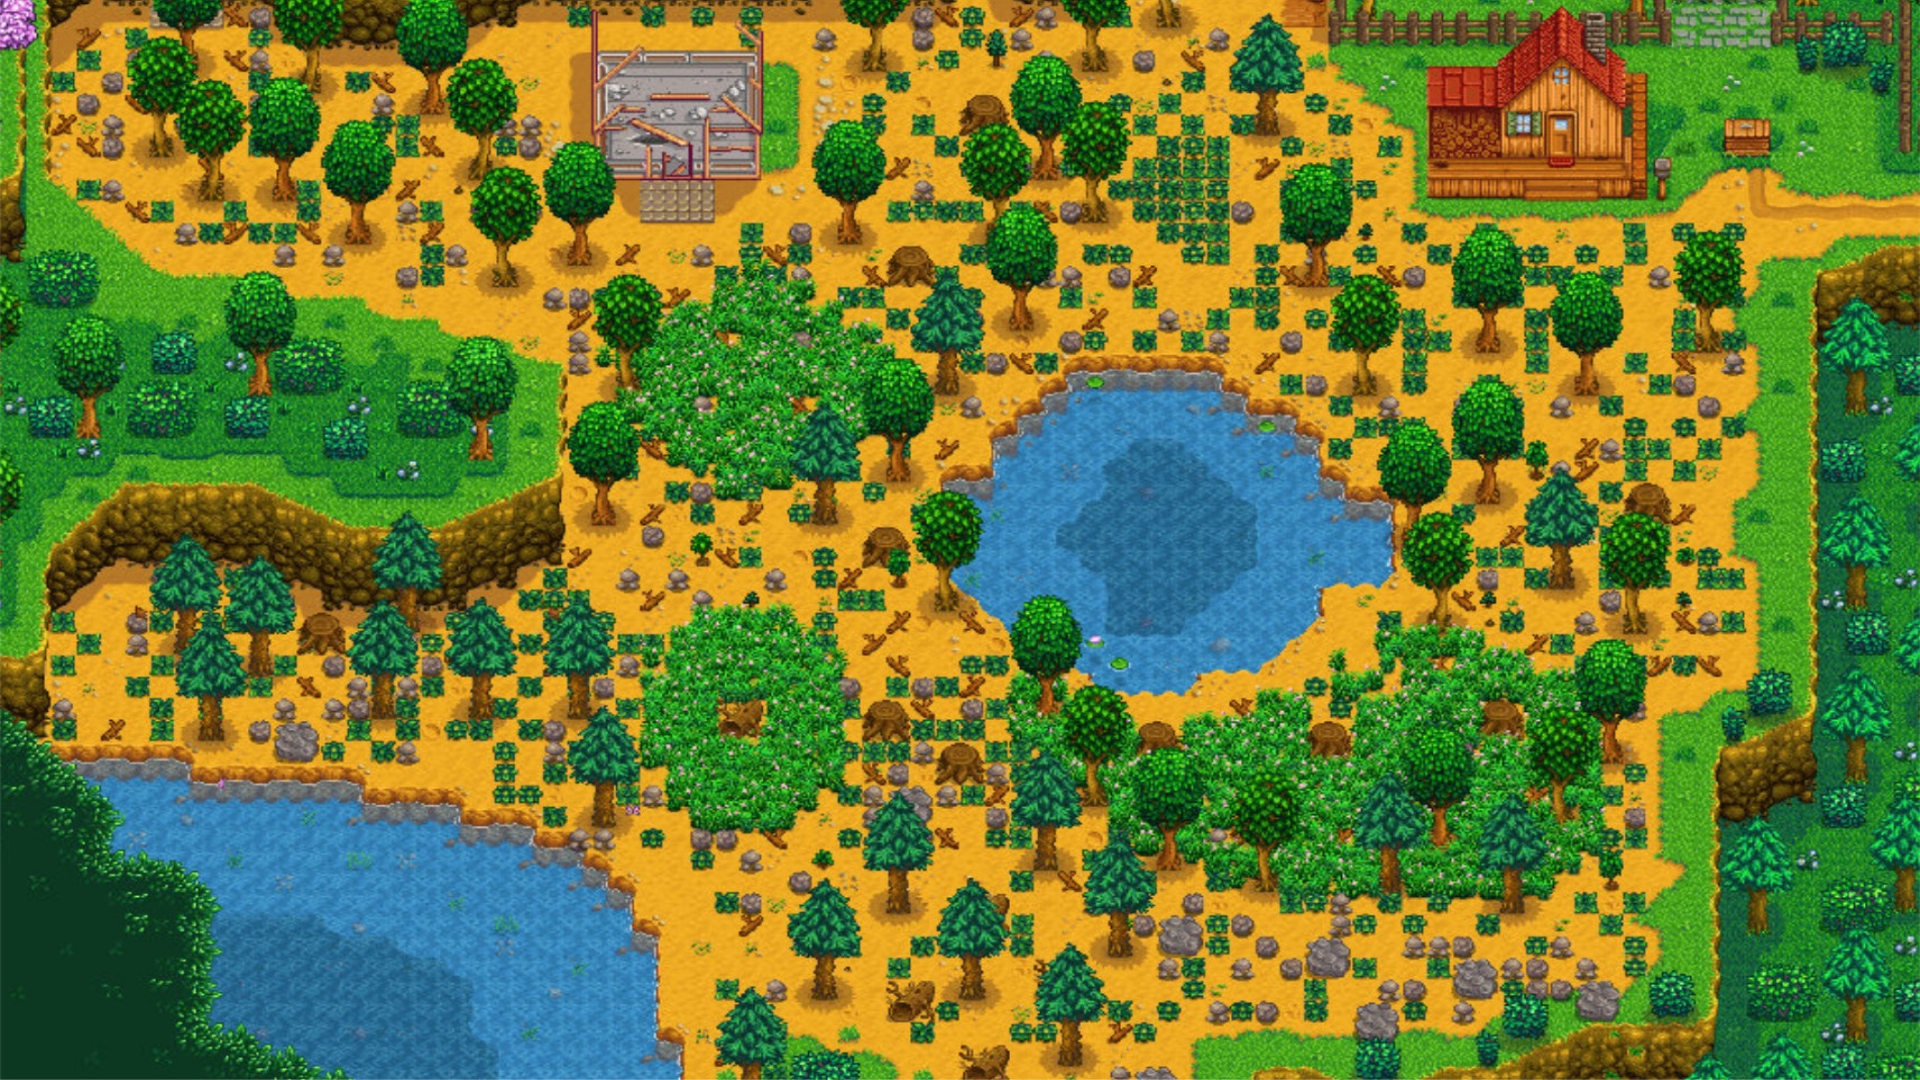 A view of the Stardew Valley wilderness map